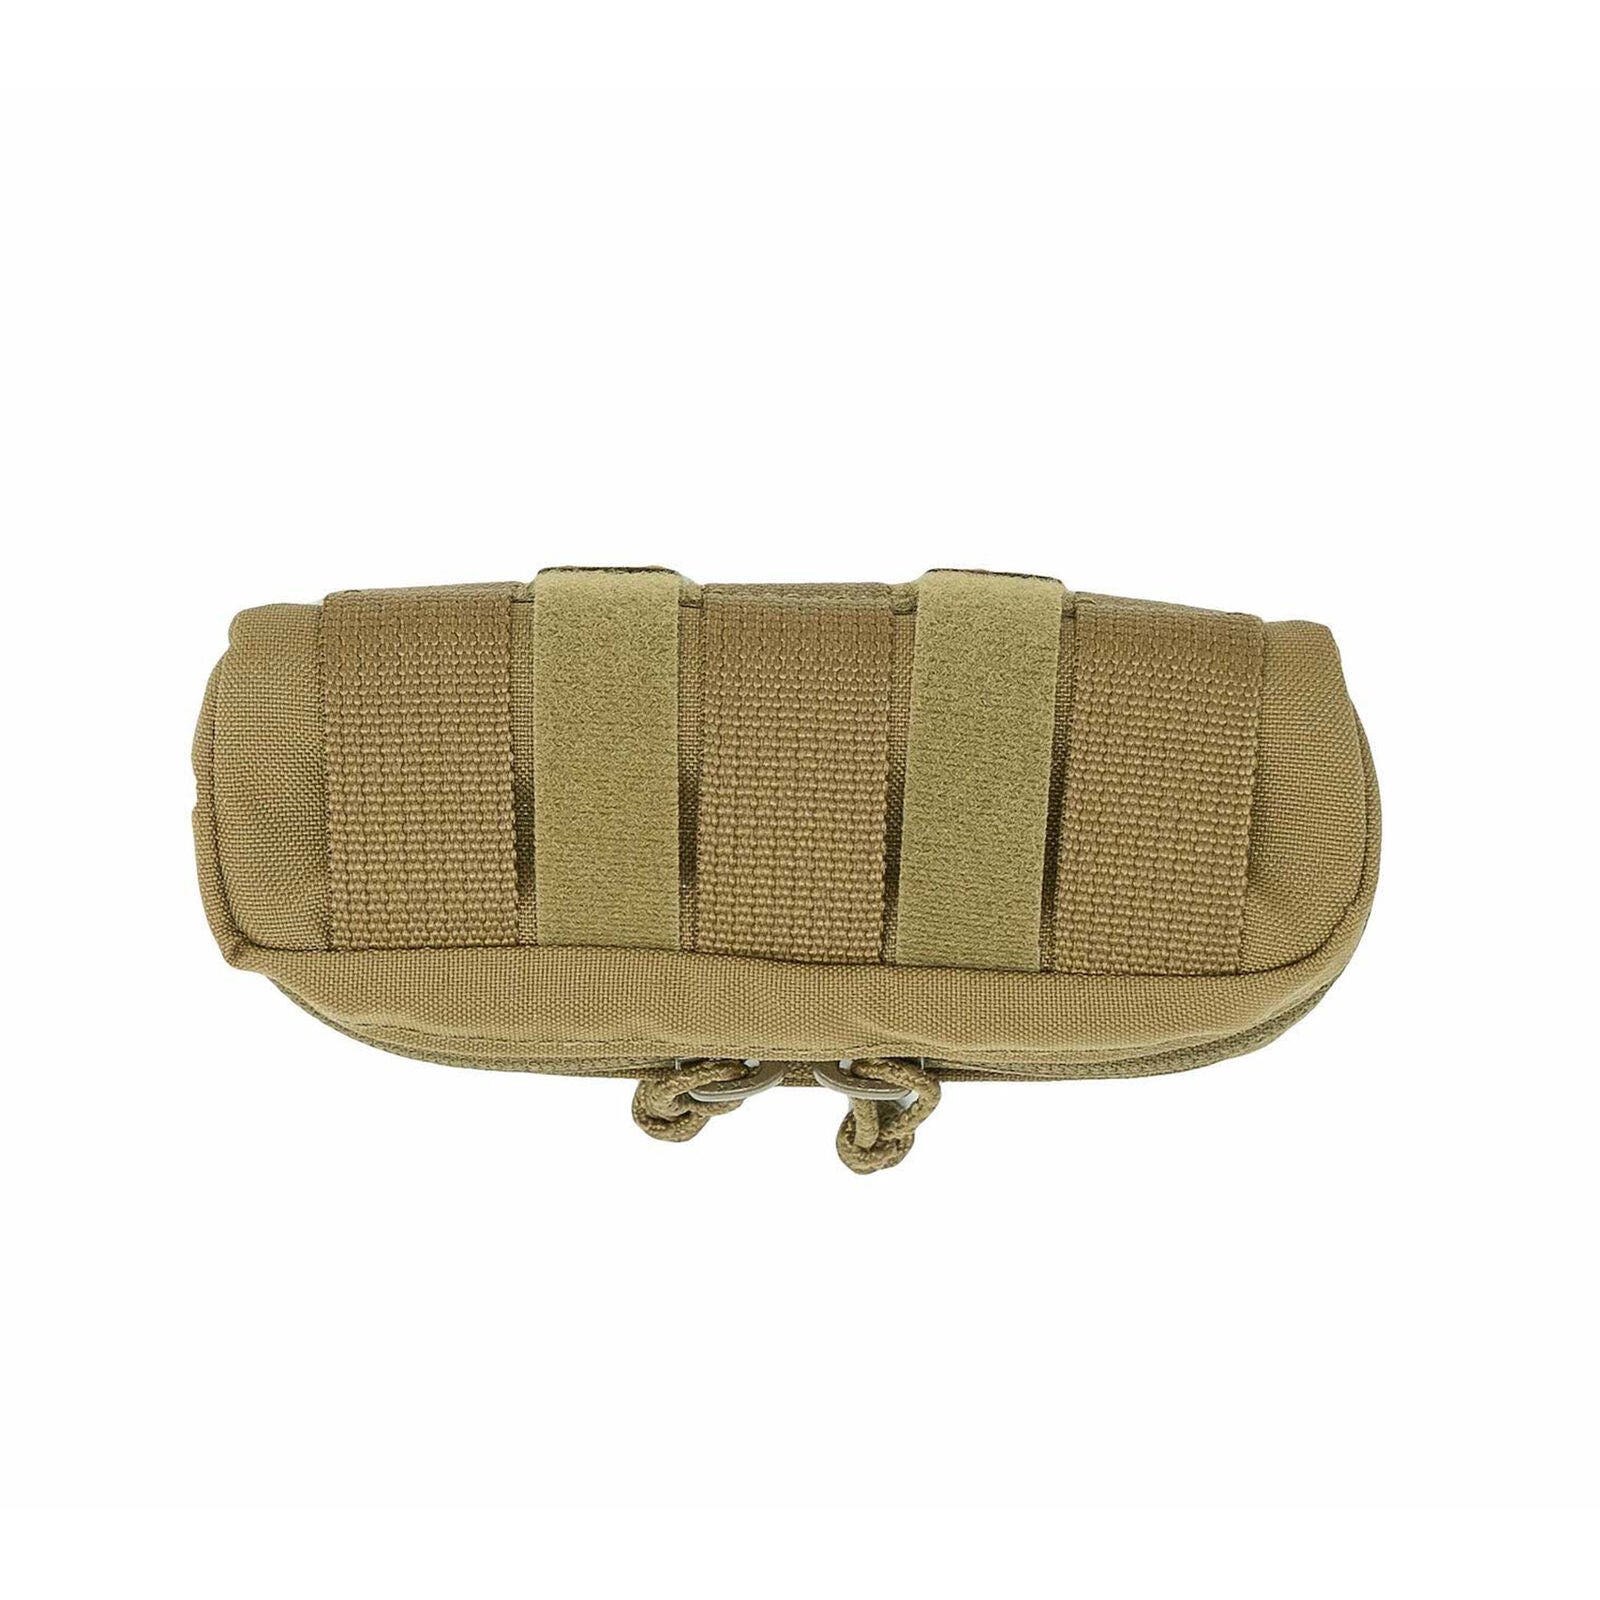 FHF Gear General Purpose Pouch